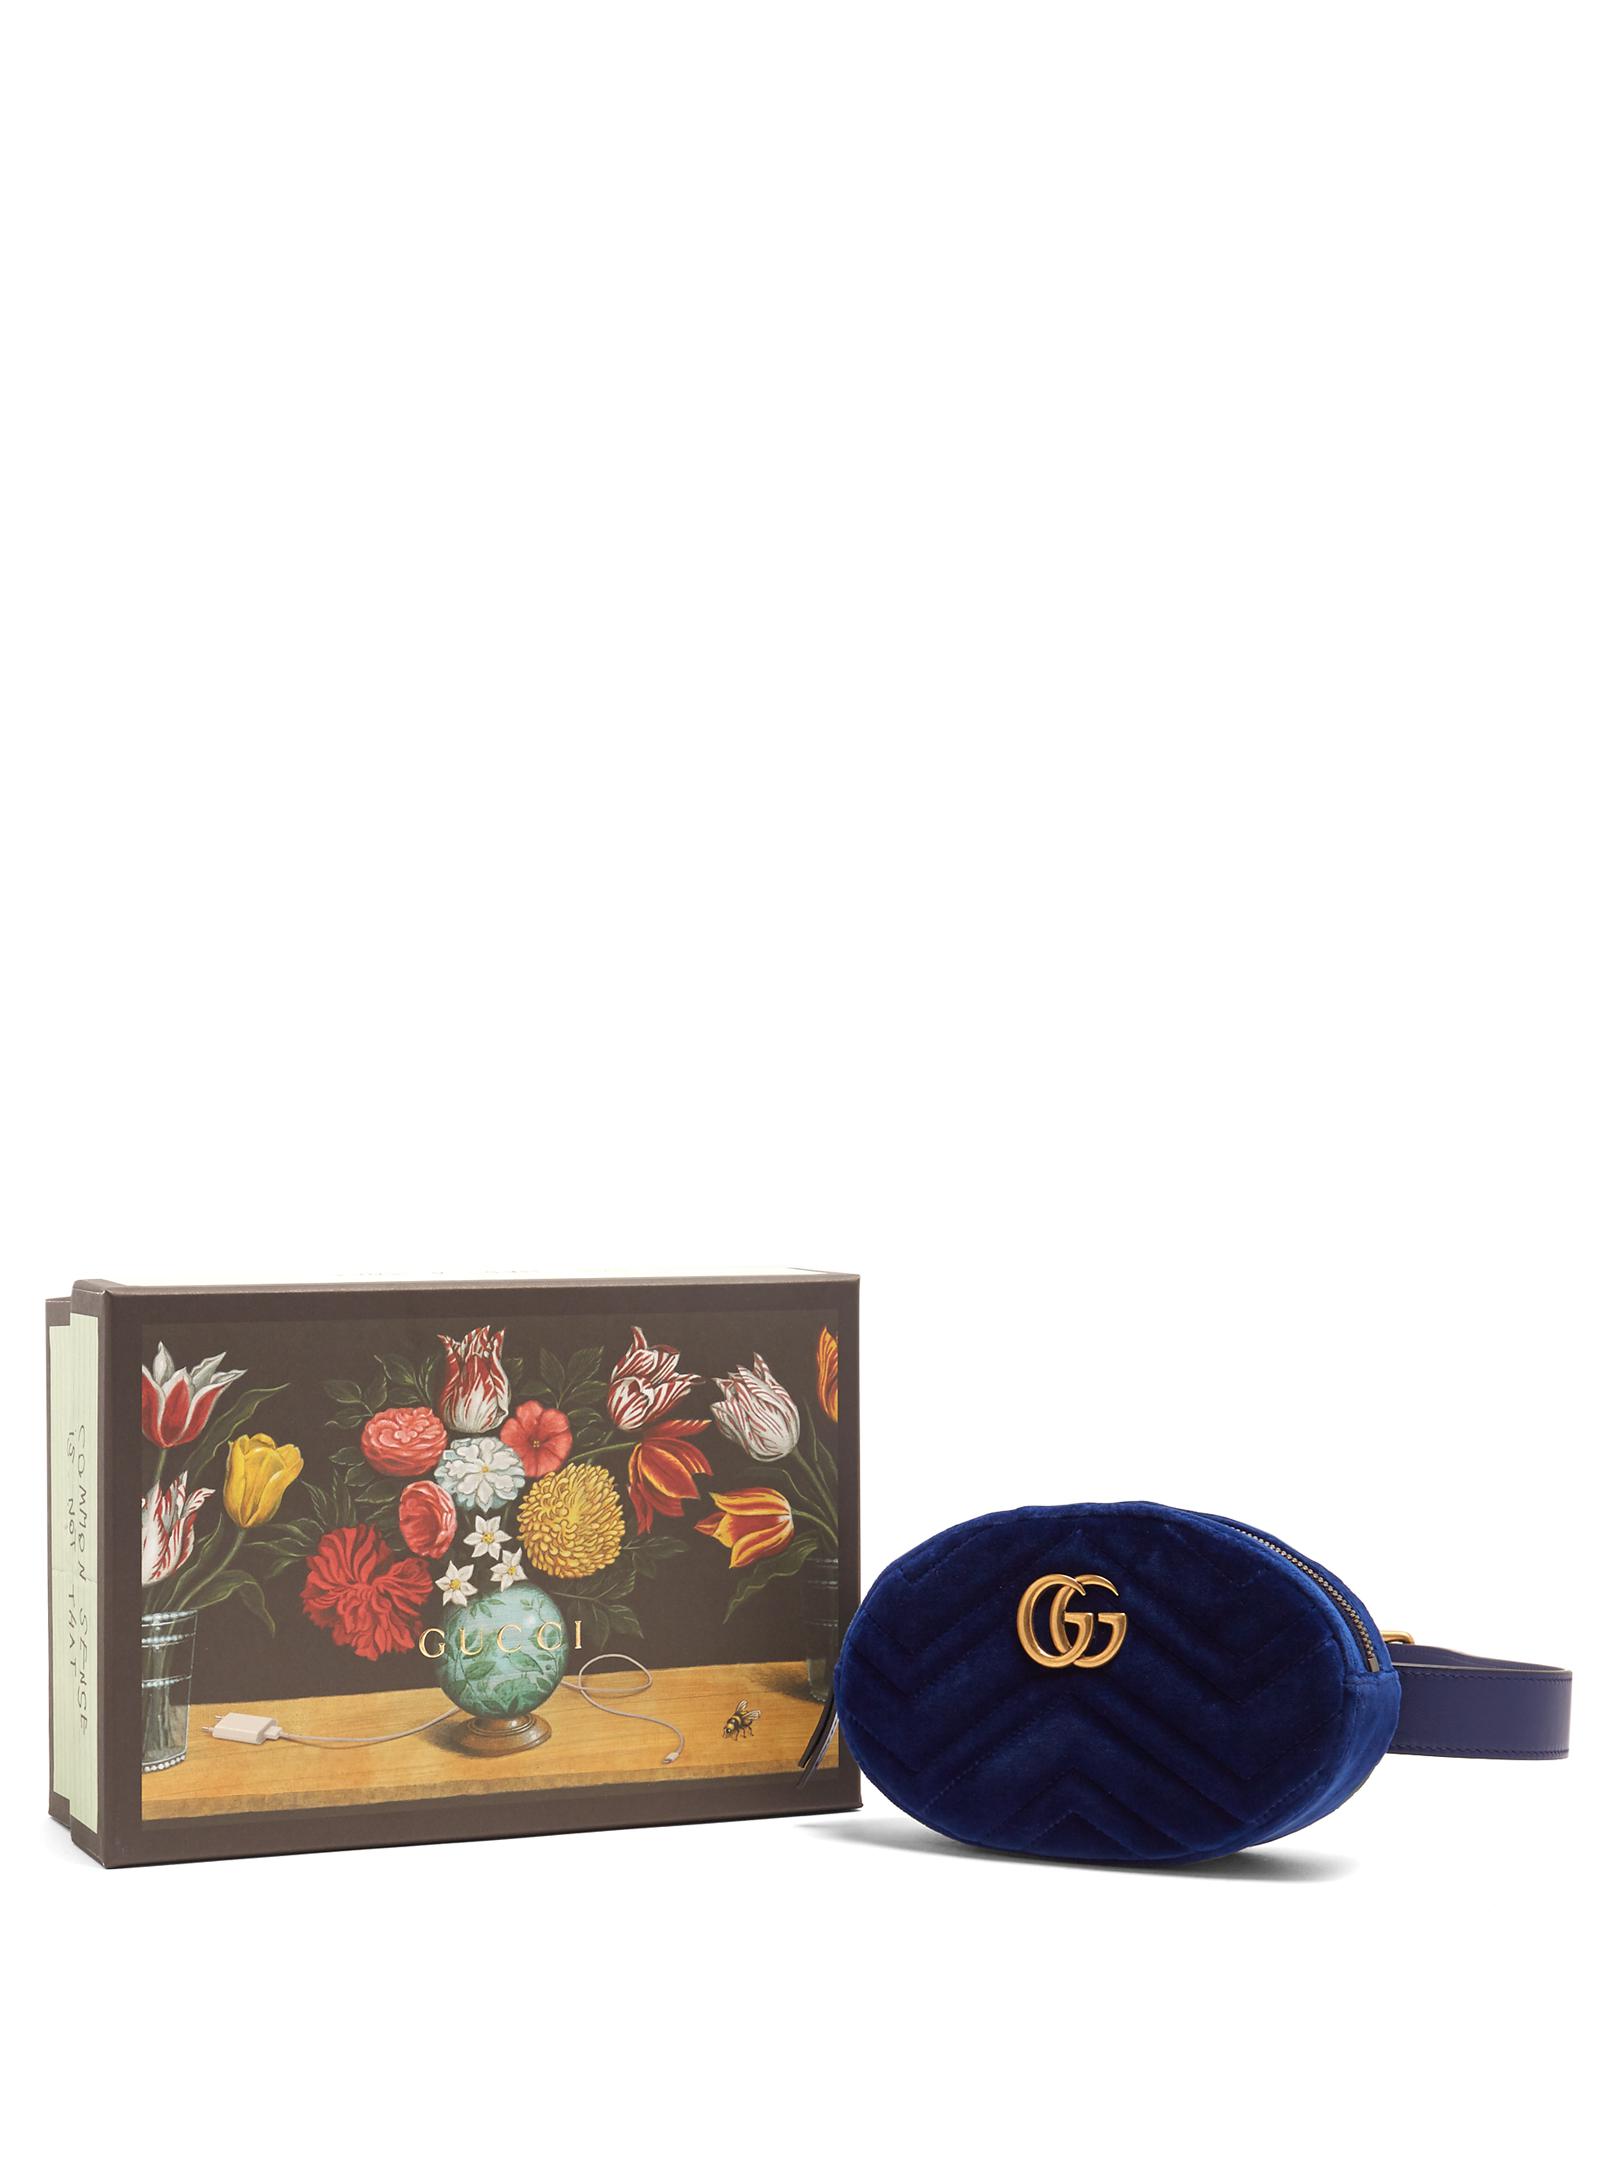 Gucci Gg Marmont Quilted-velvet Belt Bag in Blue - Lyst